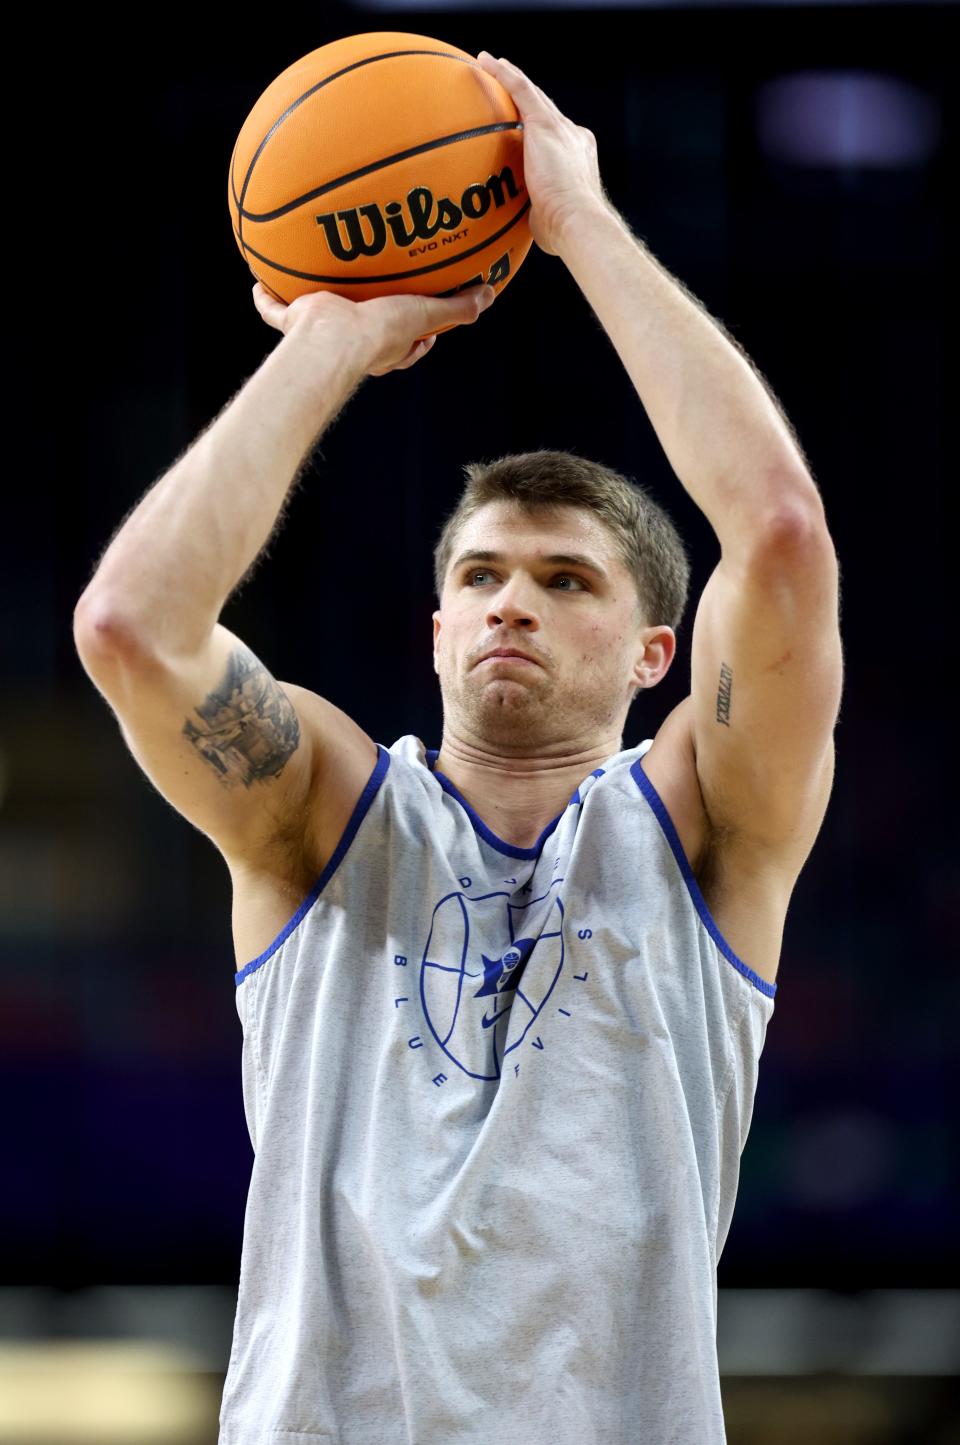 NEW ORLEANS, LOUISIANA - APRIL 01: Joey Baker #13 of the Duke Blue Devils shoots the ball during practice before the 2022 Men's Basketball Tournament Final Four at Caesars Superdome on April 01, 2022 in New Orleans, Louisiana. (Photo by Jamie Squire/Getty Images)